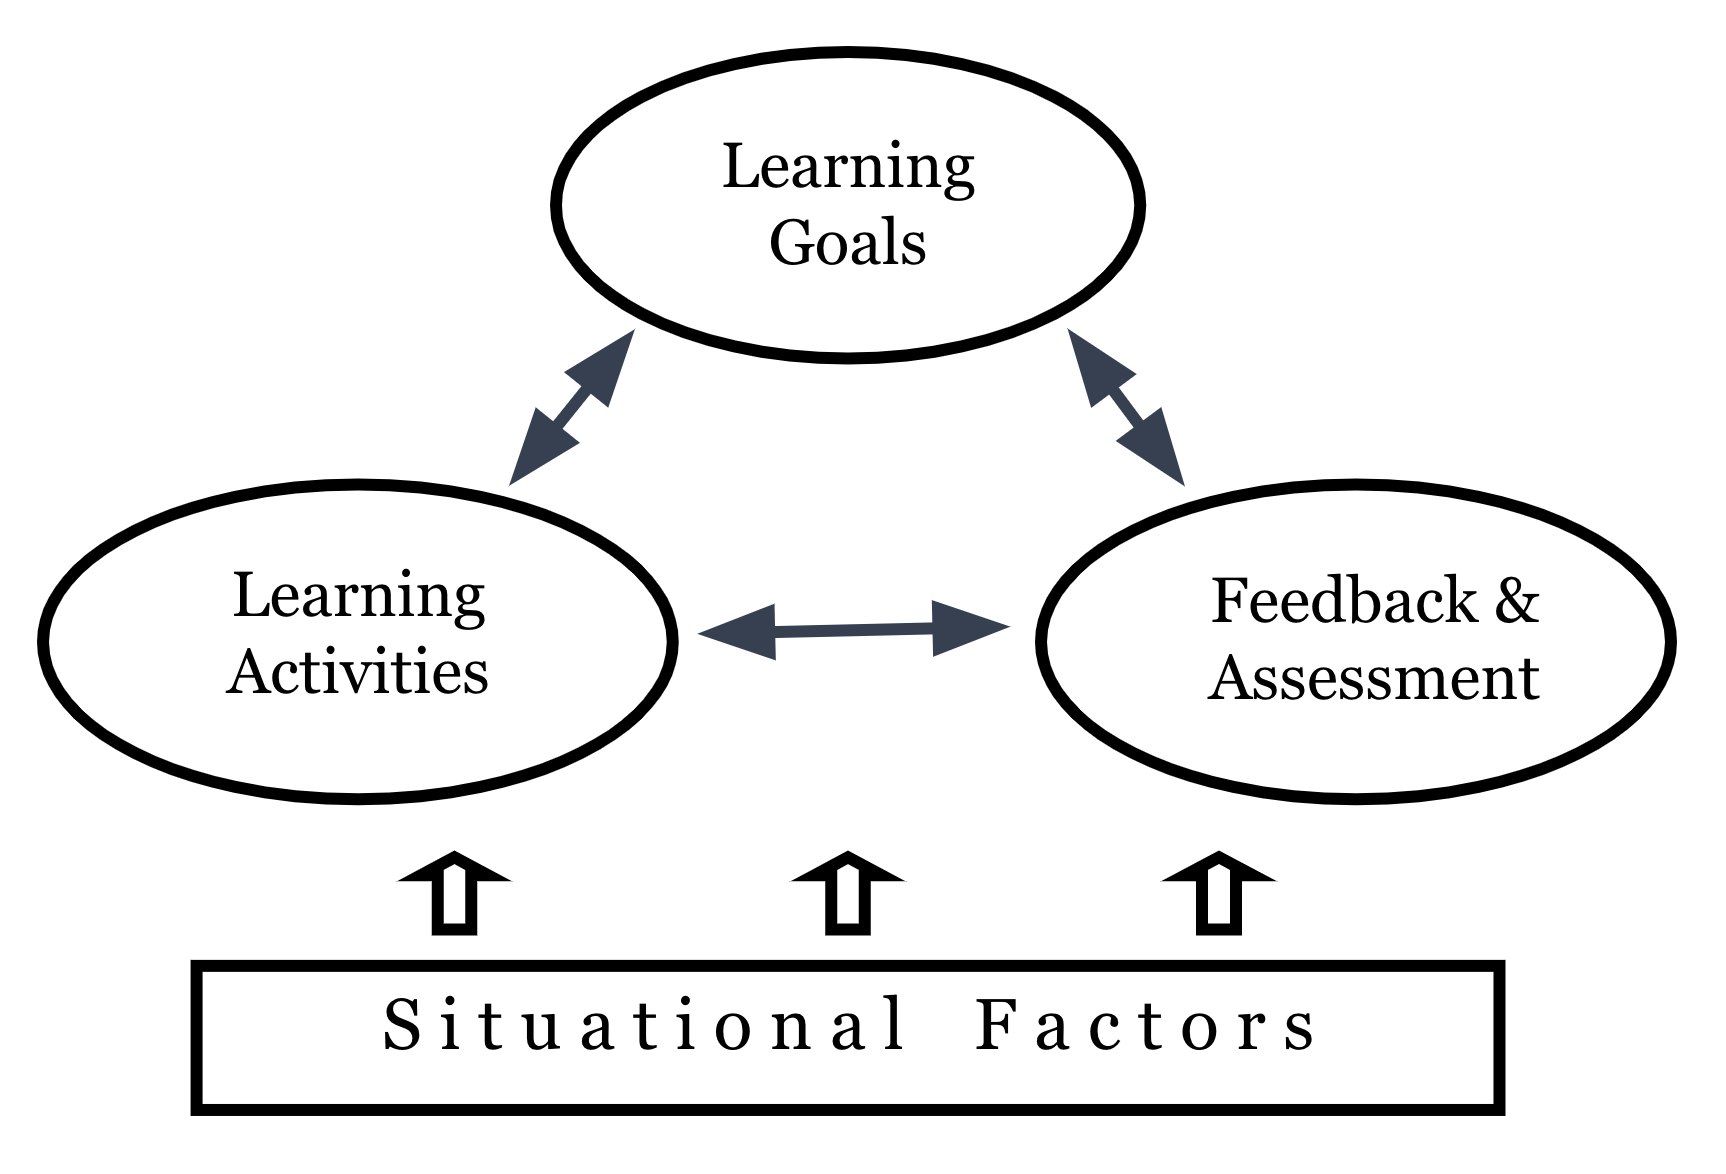 Chart: Learning goals - Learning Activities - Feedback and Assessment, all influenced by Situational factors